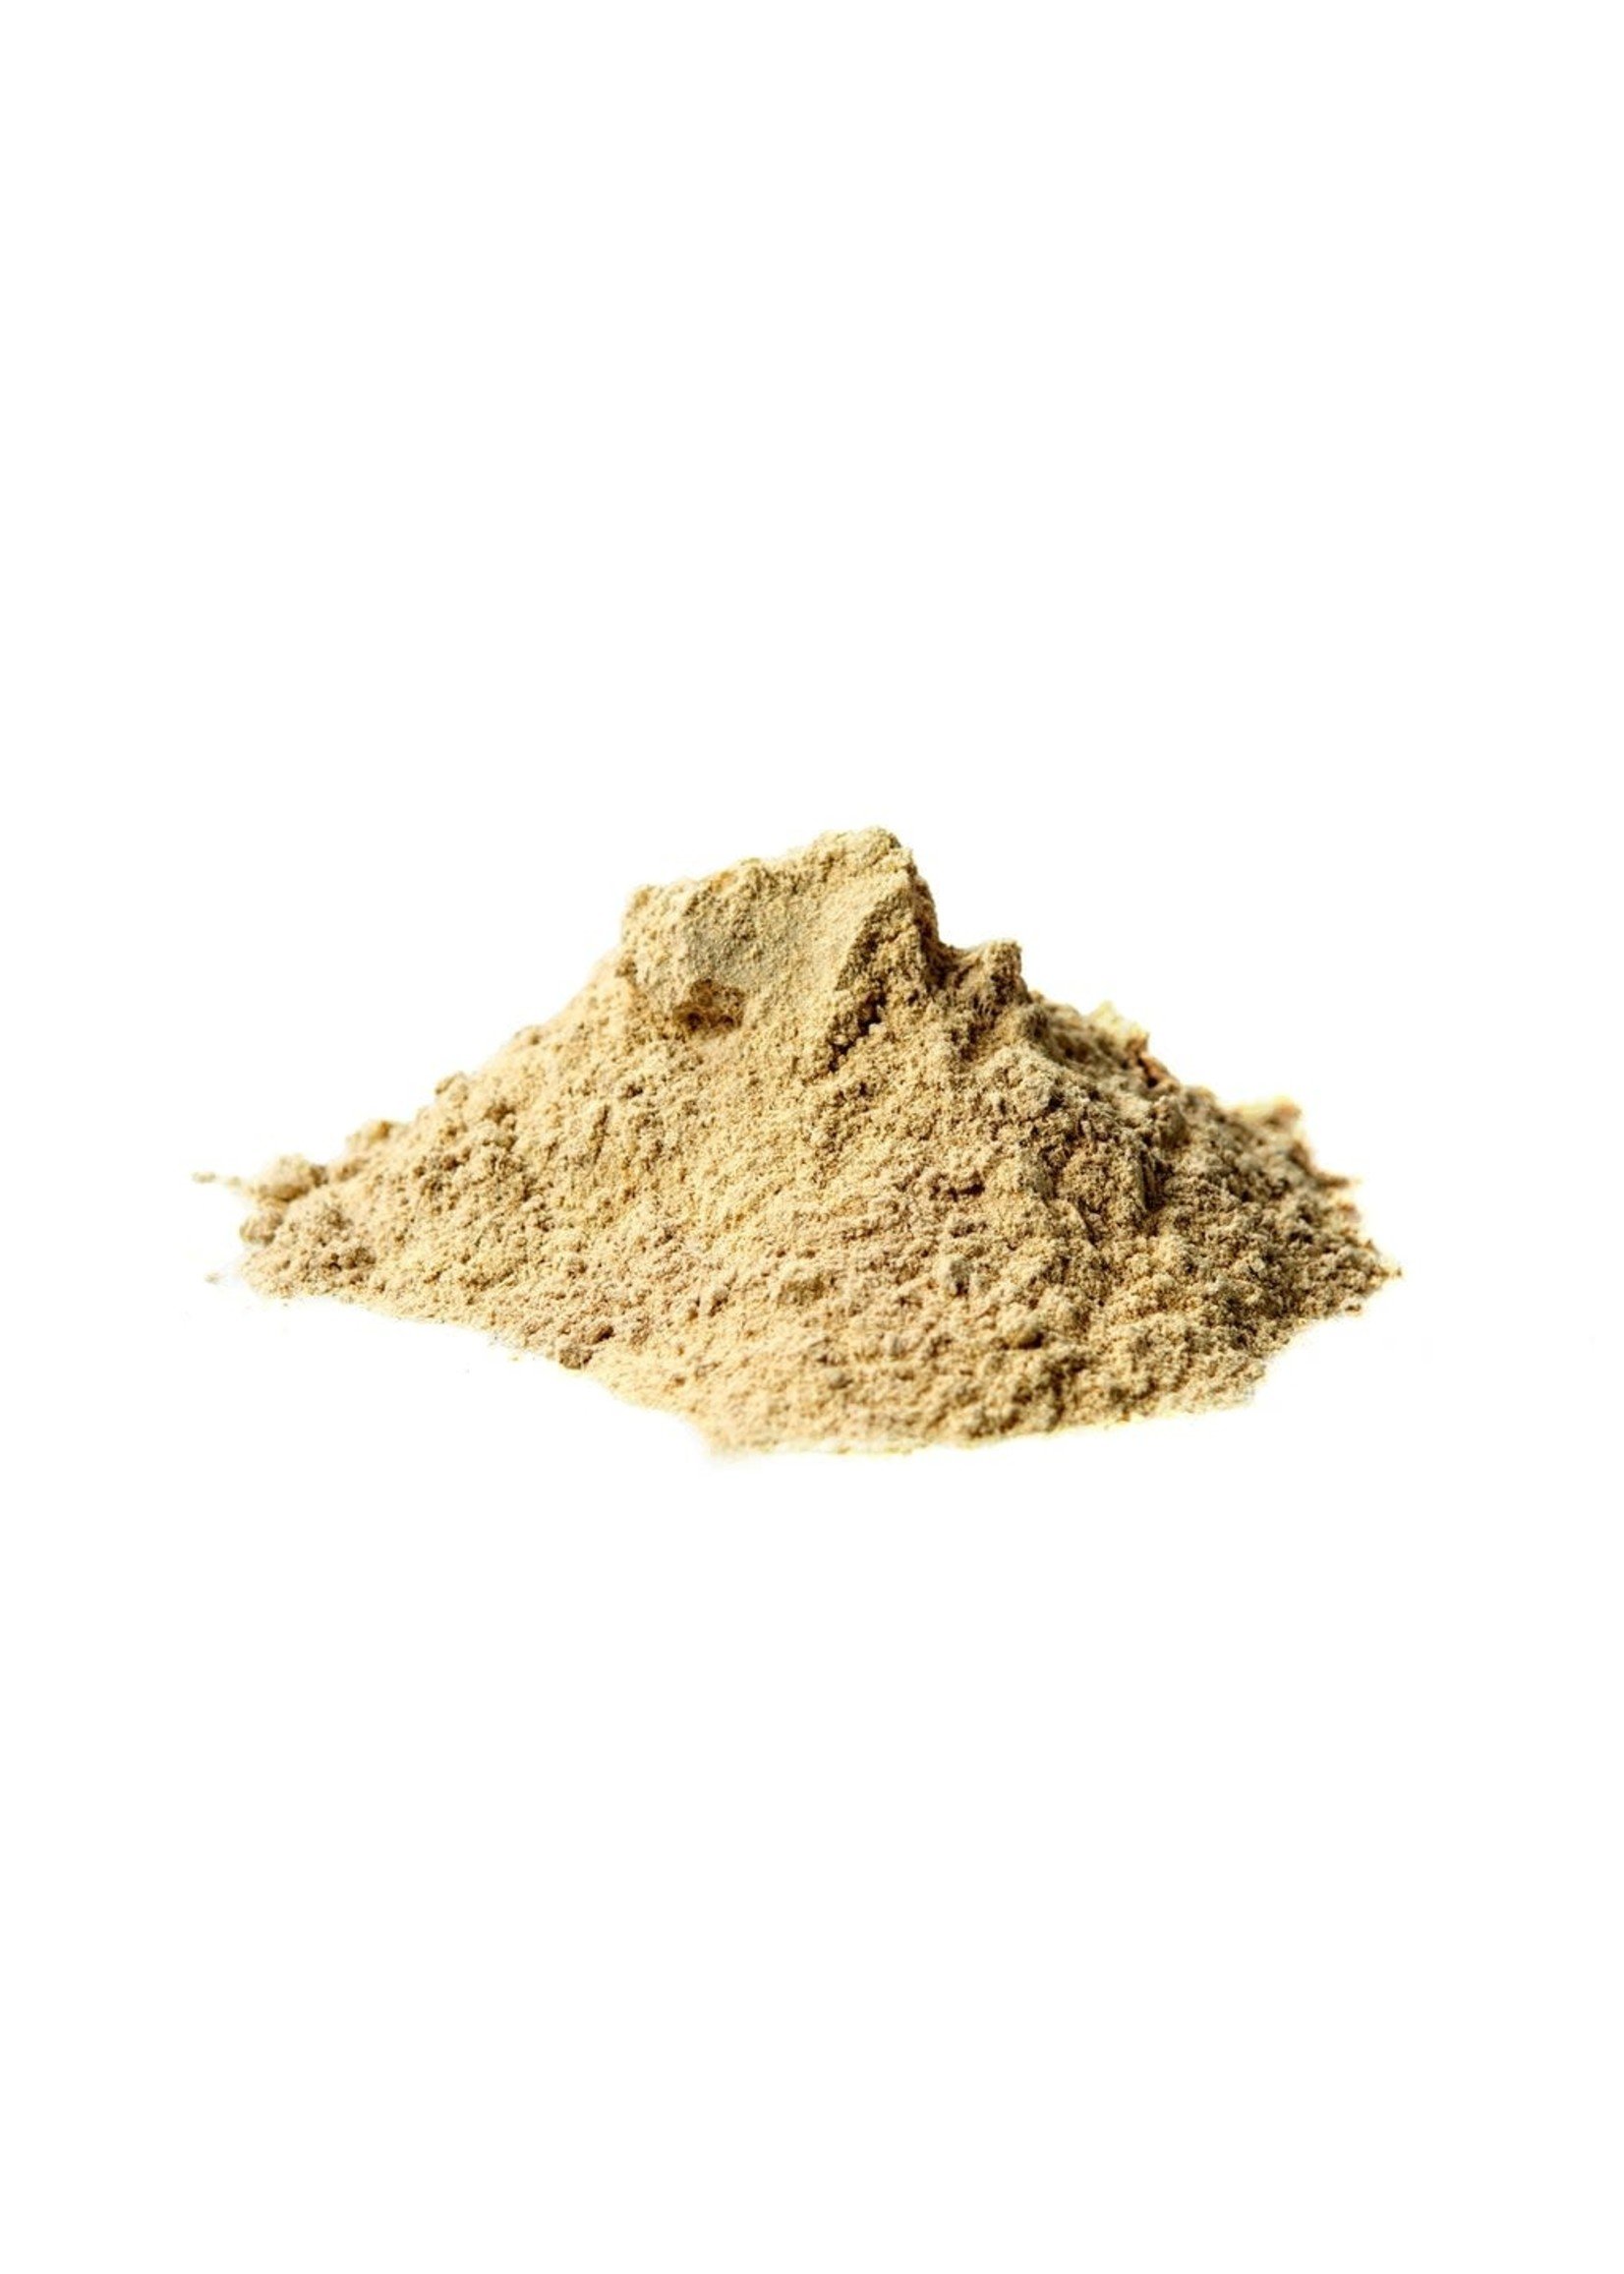 Astragalus root pwd